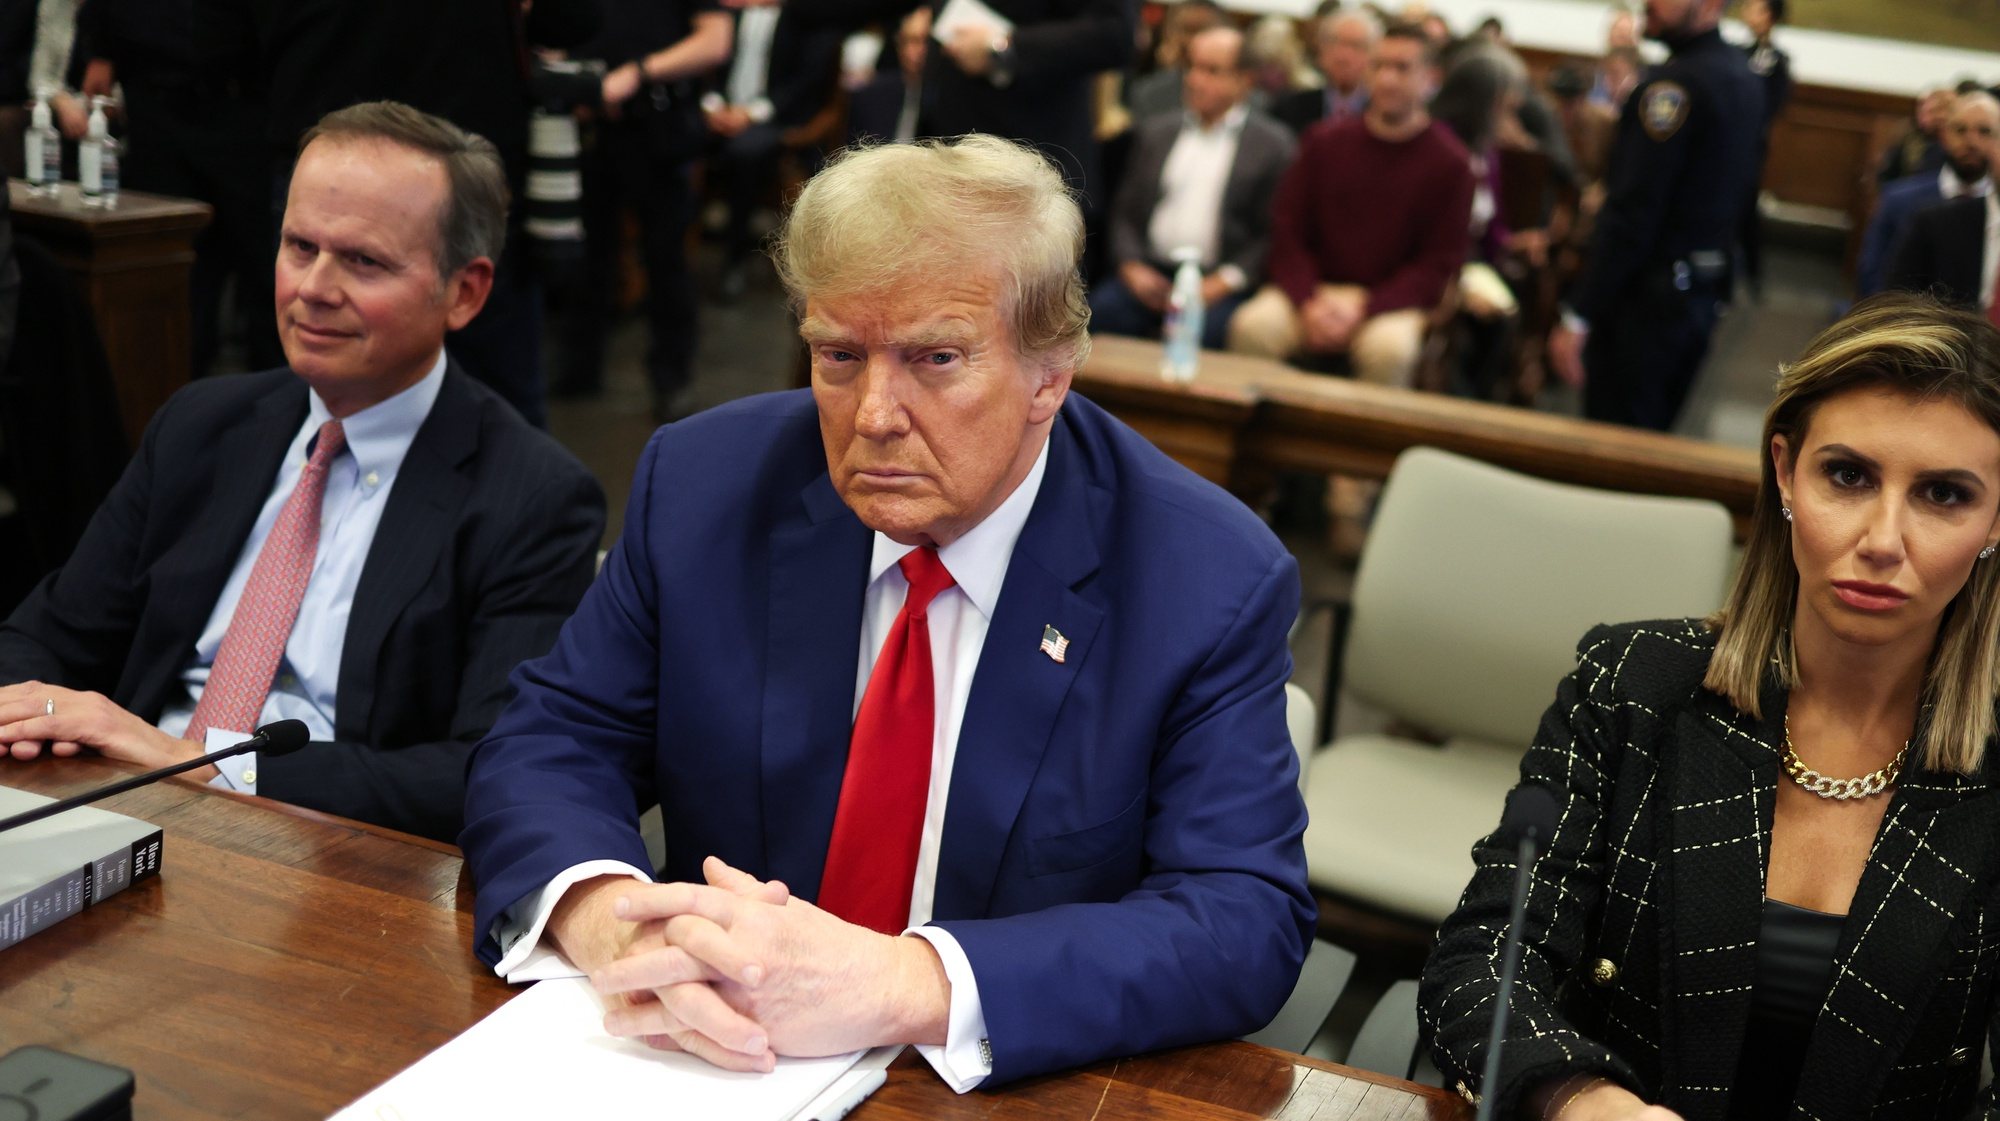 epa11069856 Former US President Donald J. Trump (C), flanked by lawyers Christopher Kise (L) and Alina Habba (R), sits in court during closing arguments in the Trump Organization civil fraud trial at New York State Supreme Court in the Manhattan borough of New York, New York, USA, 11 January 2024. Trump is facing up to a 370 million US dollar fine for inflating the value of assets to get favorable loans from banks.  EPA/CHARLY TRIBALLEAU / POOL